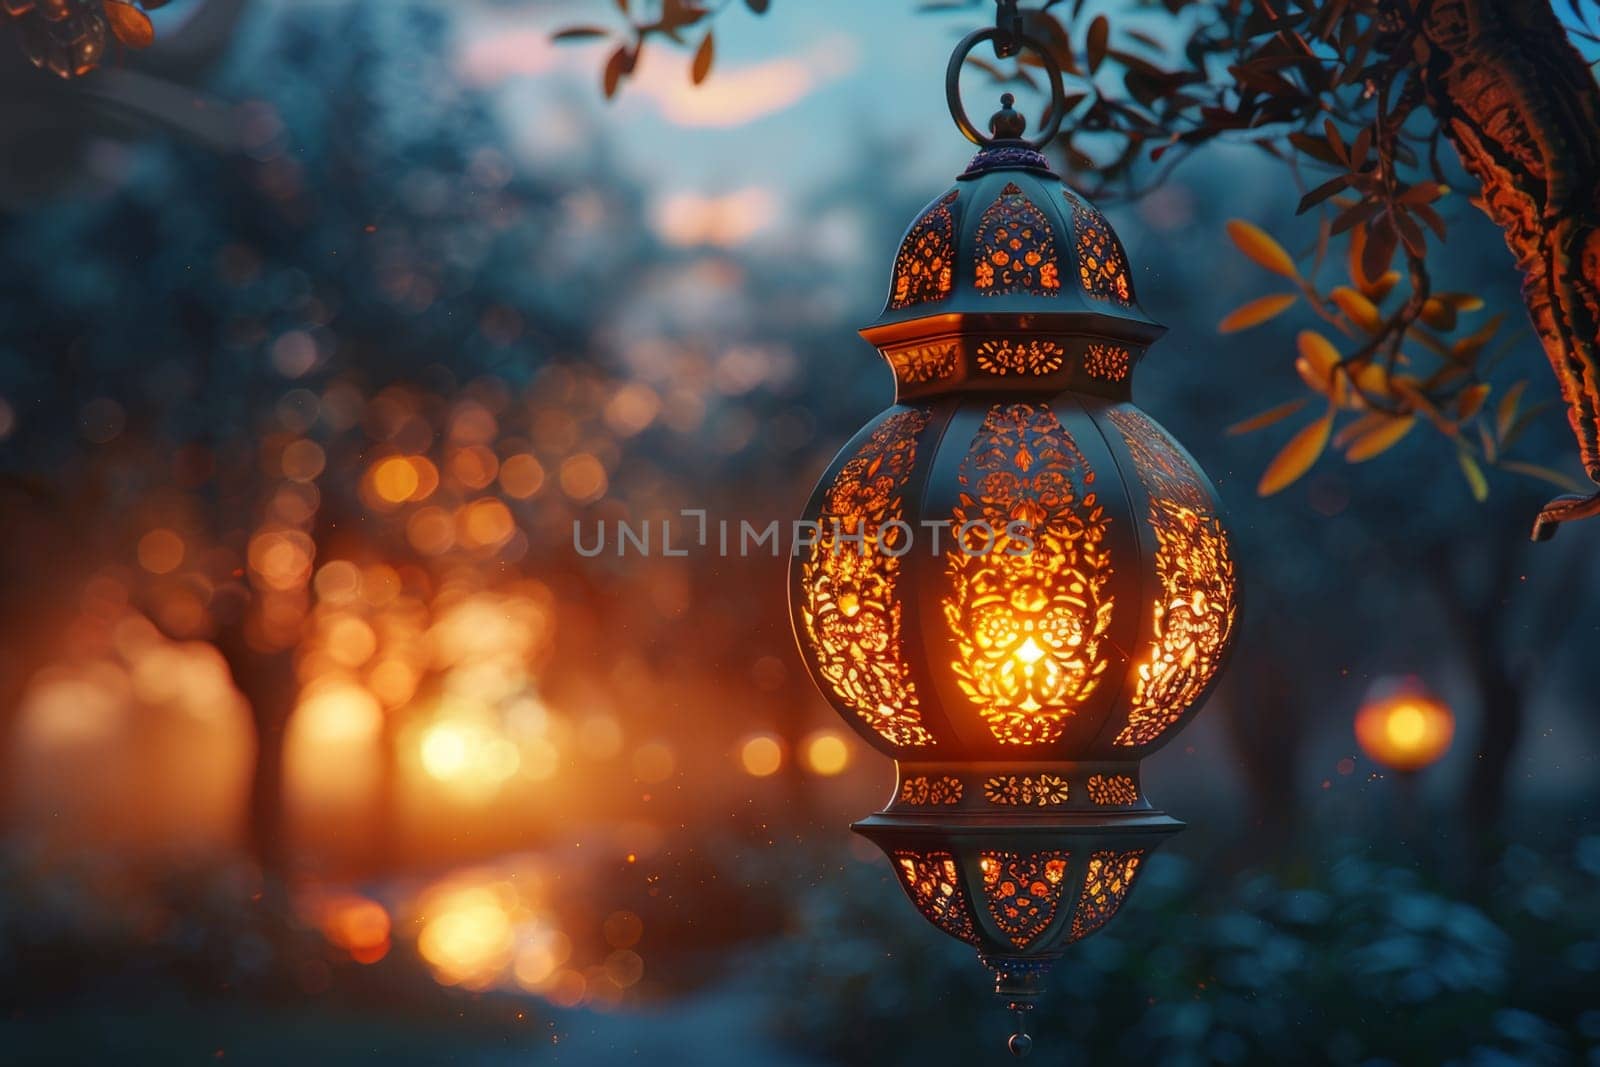 Decorative Arabic lantern with burning candle, glowing in the night. Festive card, invitation to the holy holiday for Muslims Eid al adha.